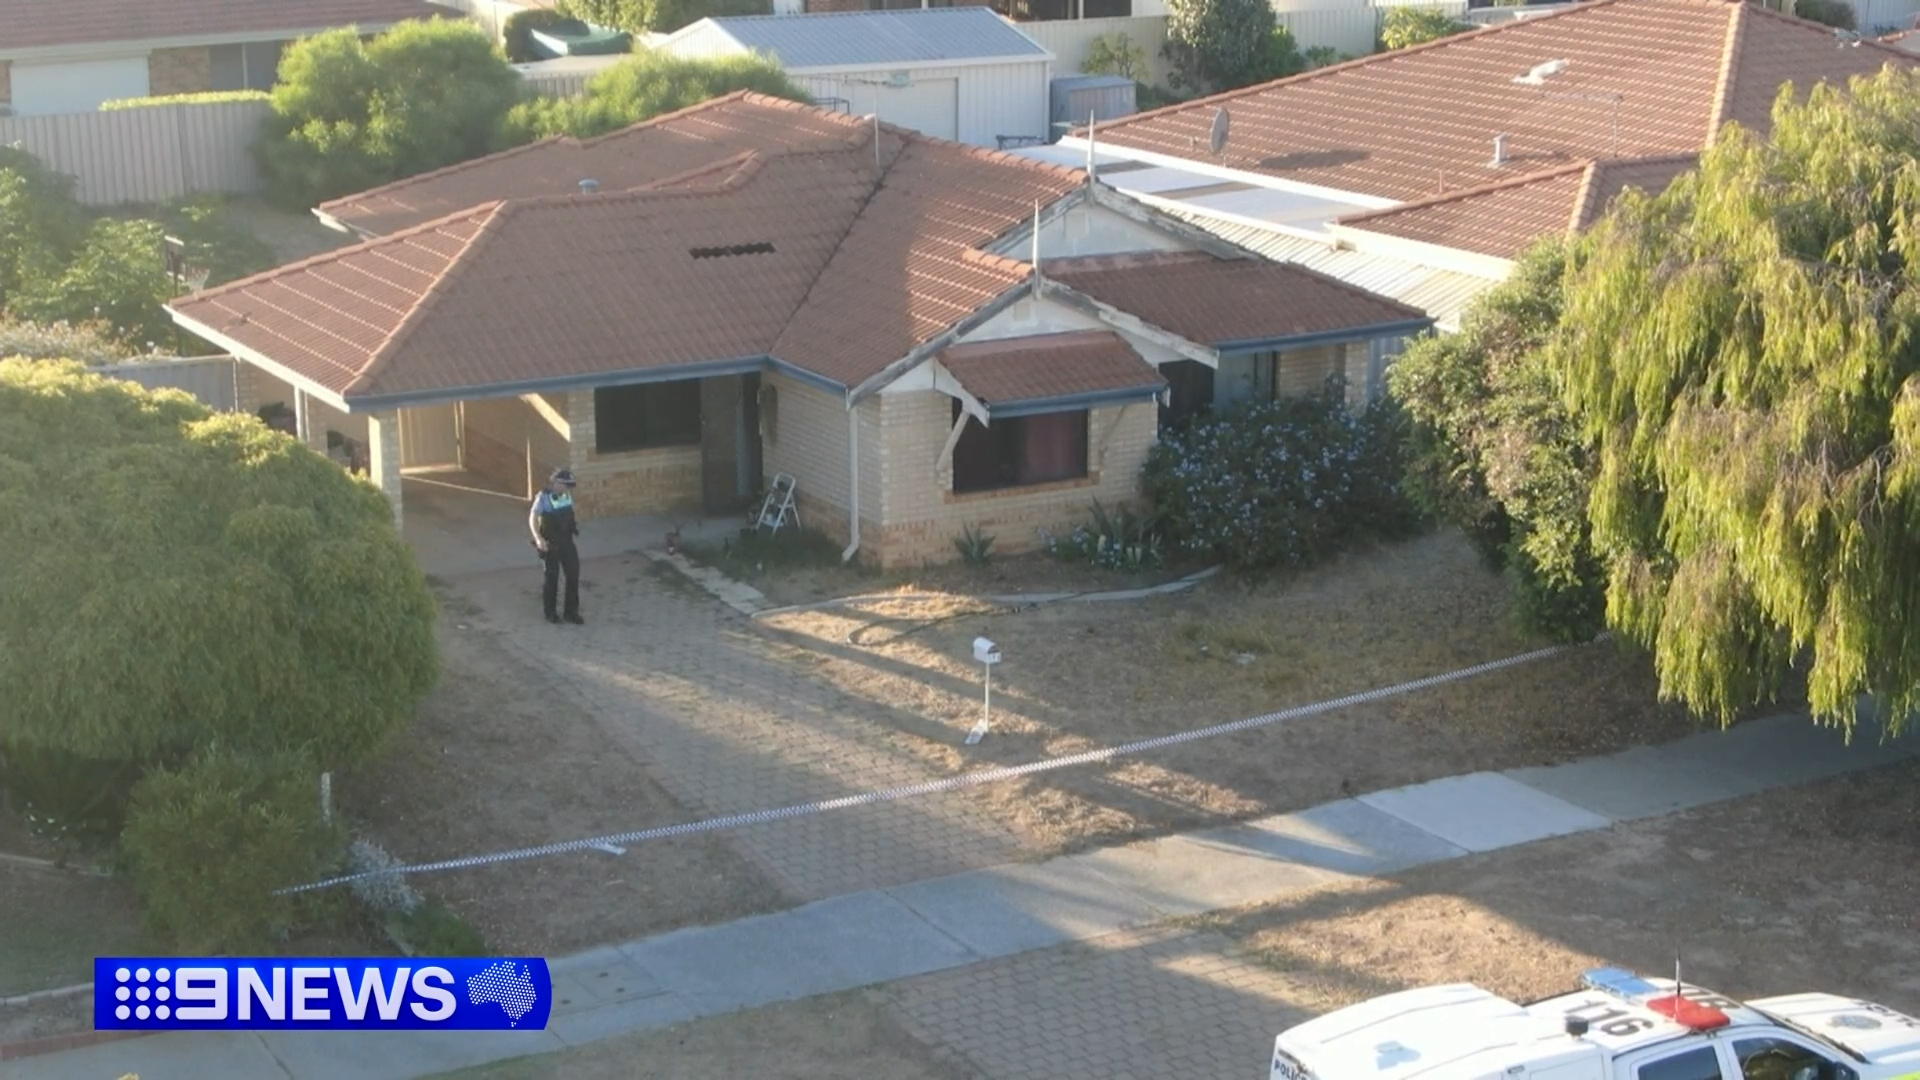 A man has been arrested after a woman was found dead in a Perth house fire that police are treating as suspicious.